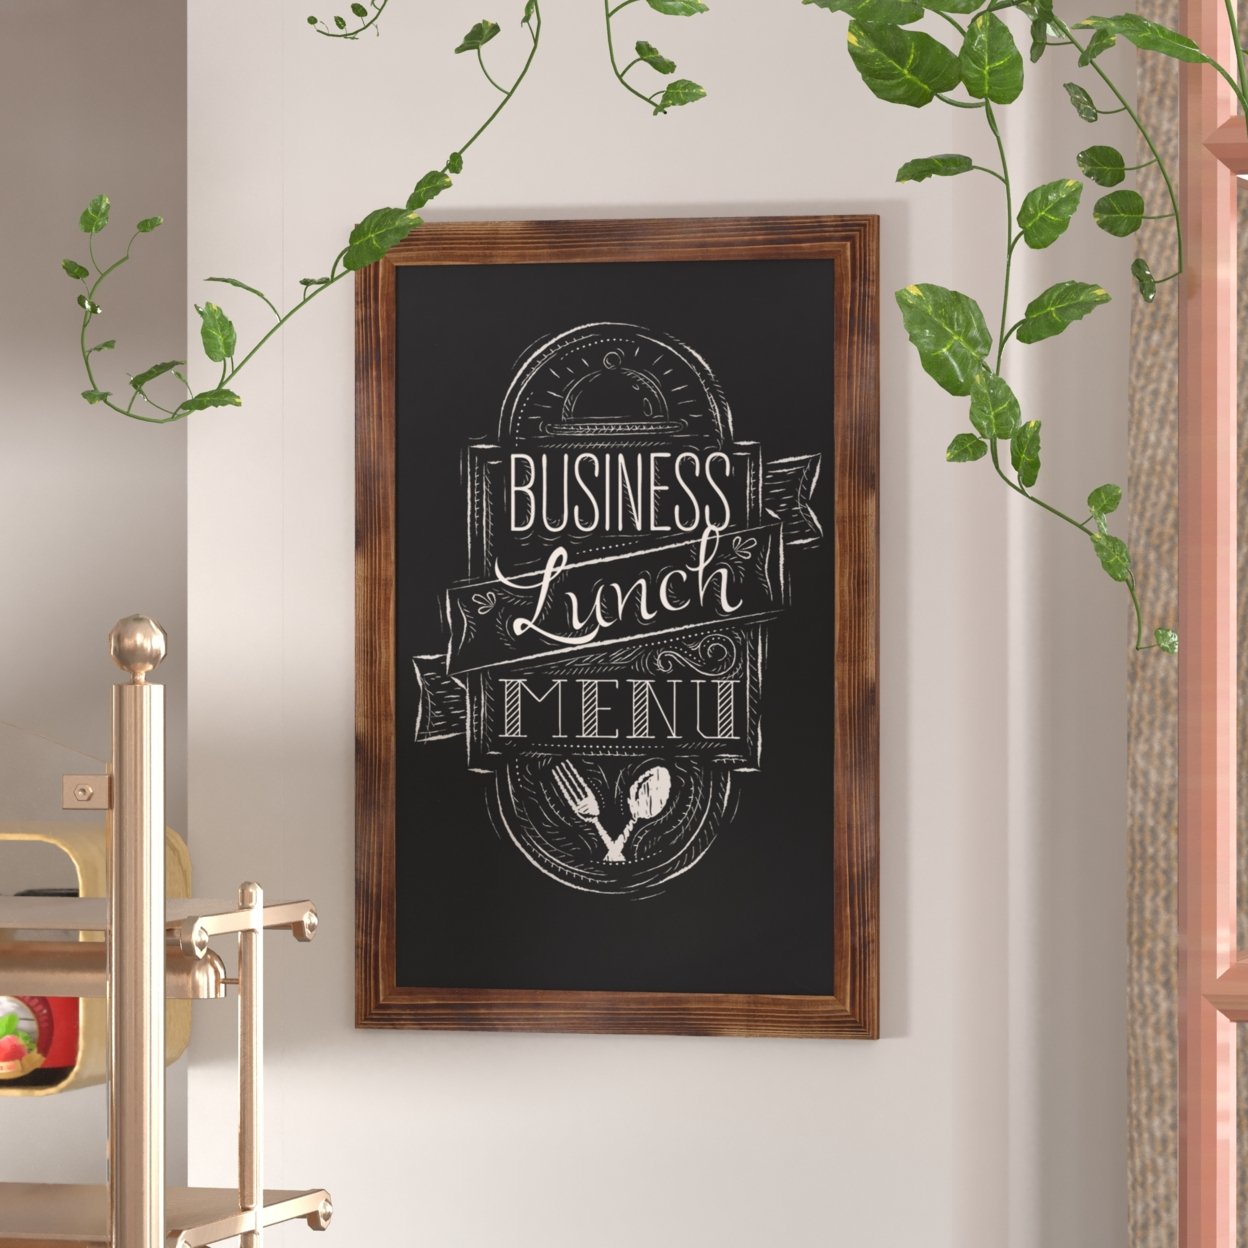 Wall Hanging Chalkboard, Brown Wood Frame, Rough Hewn Texture